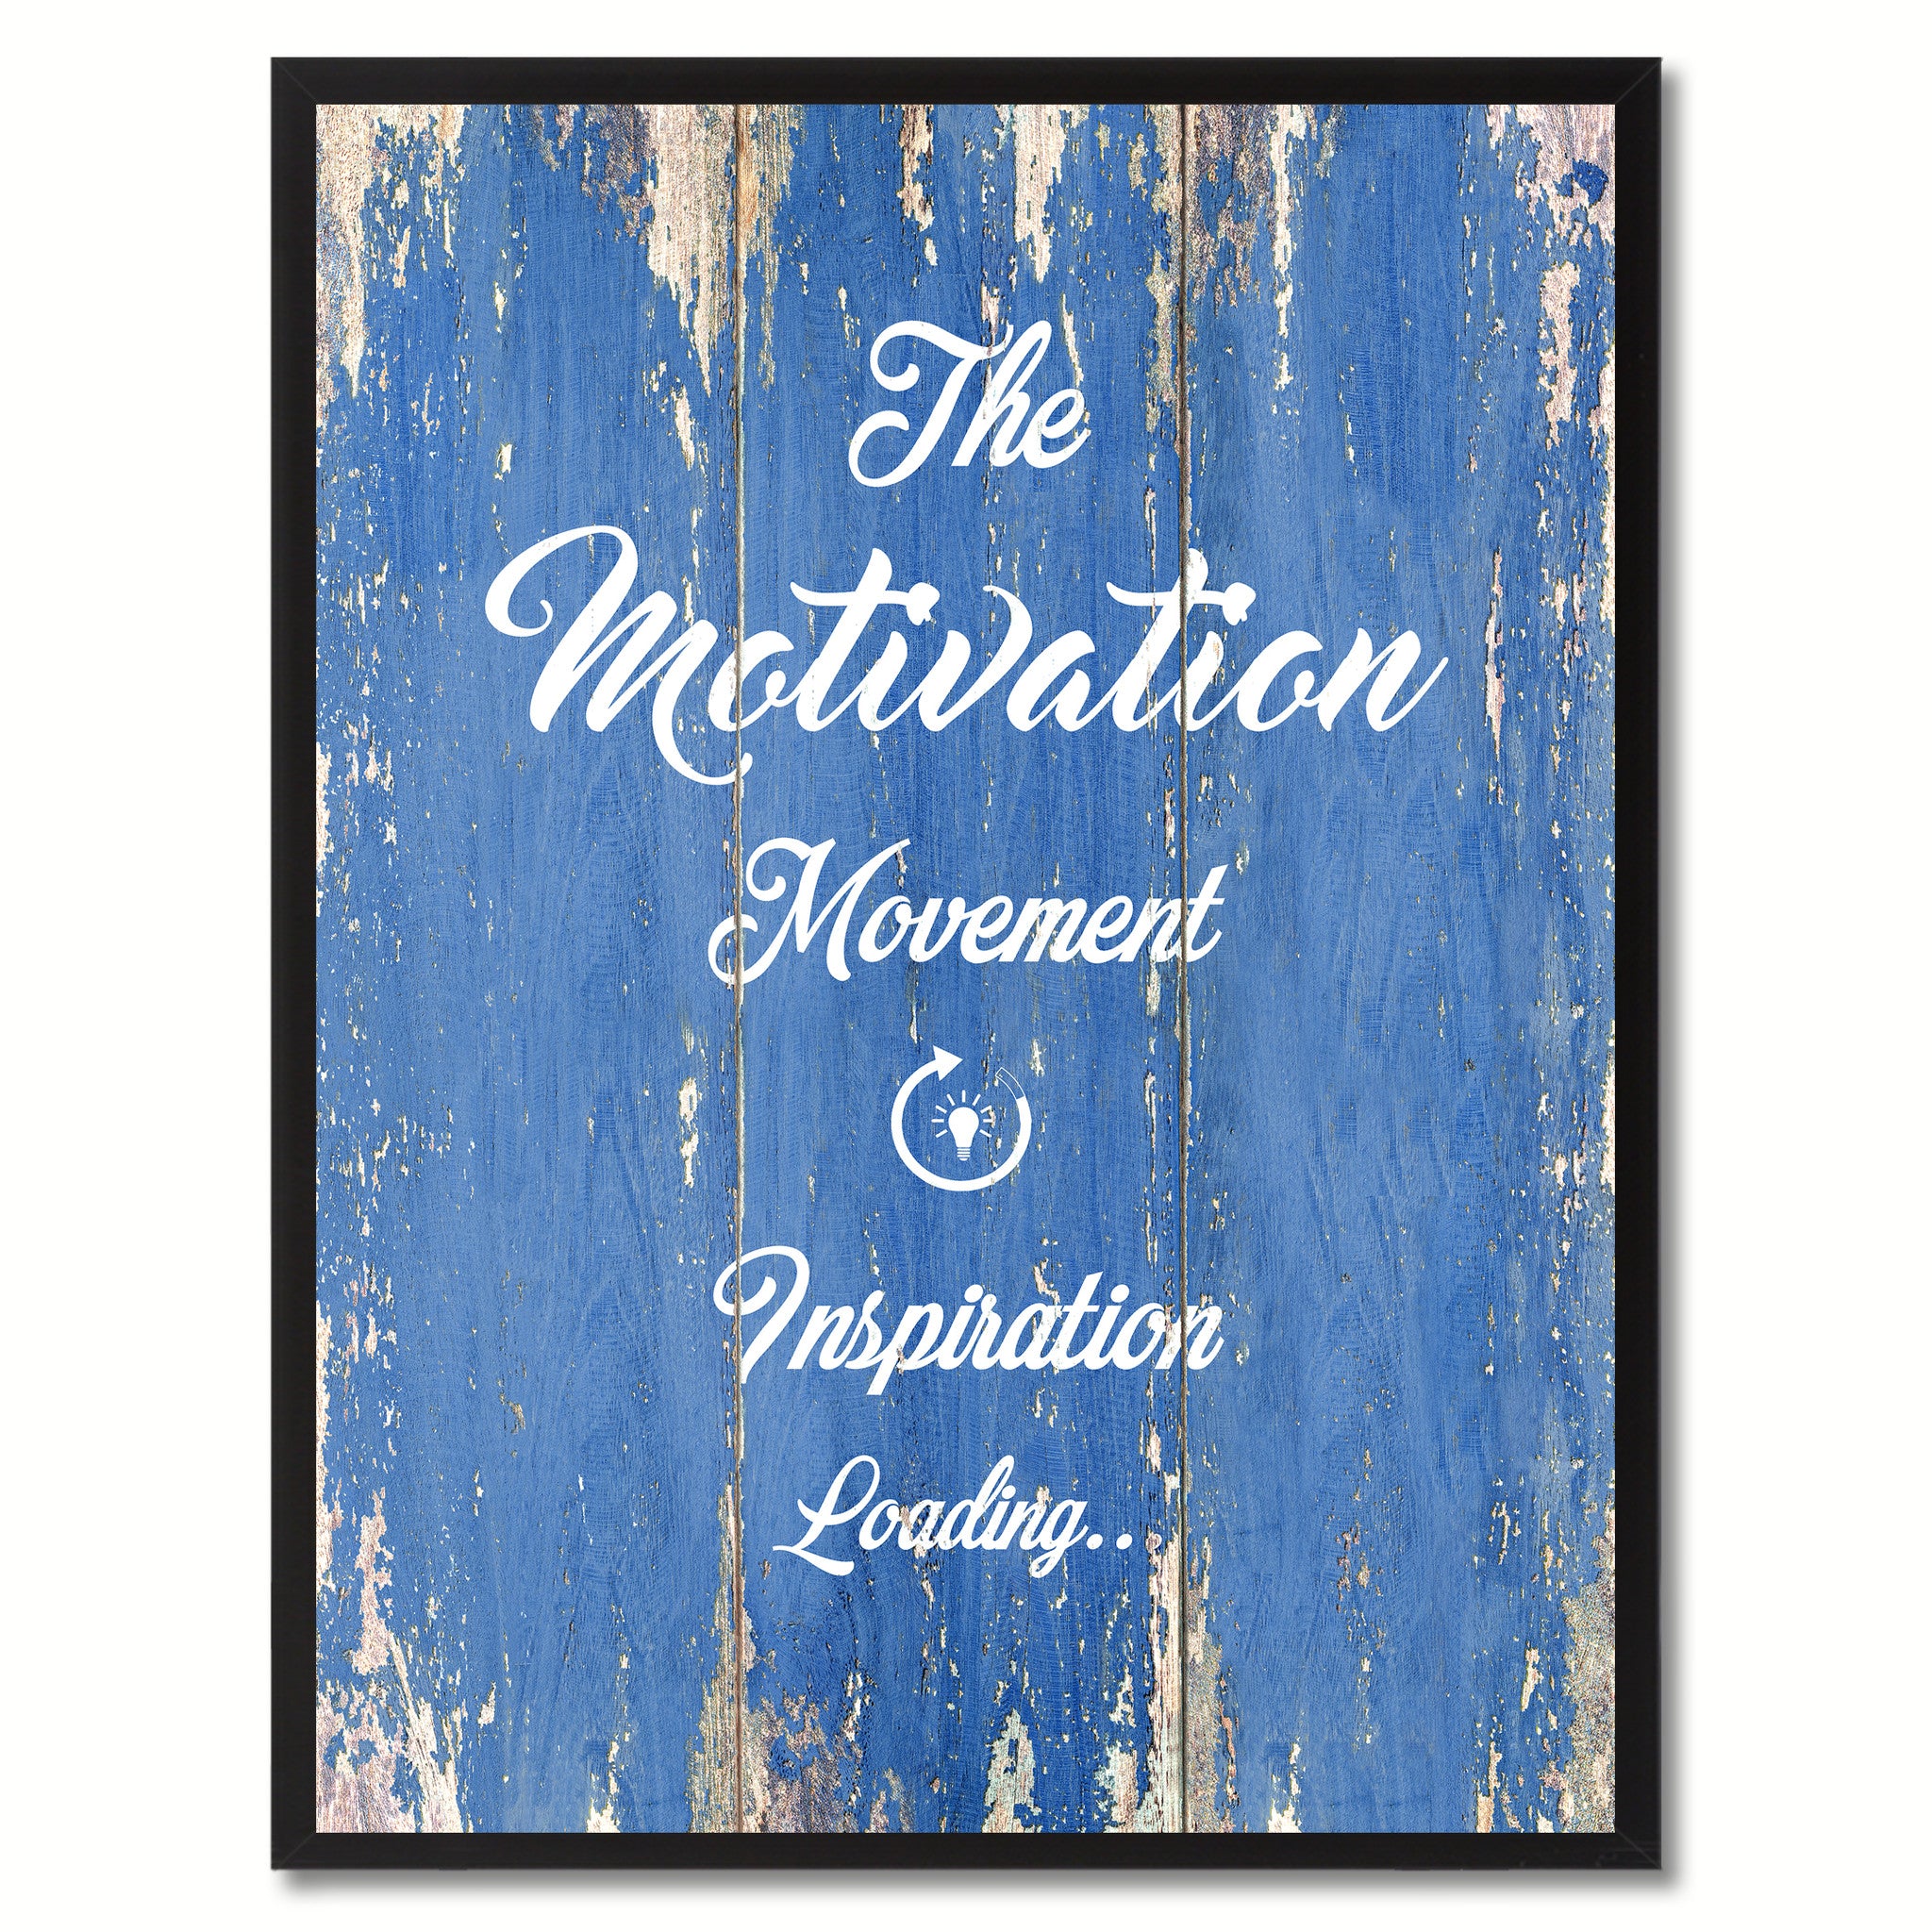 The Motivation Movement Inspiration Loading  Quote Saying Gift Ideas Home Décor Wall Art